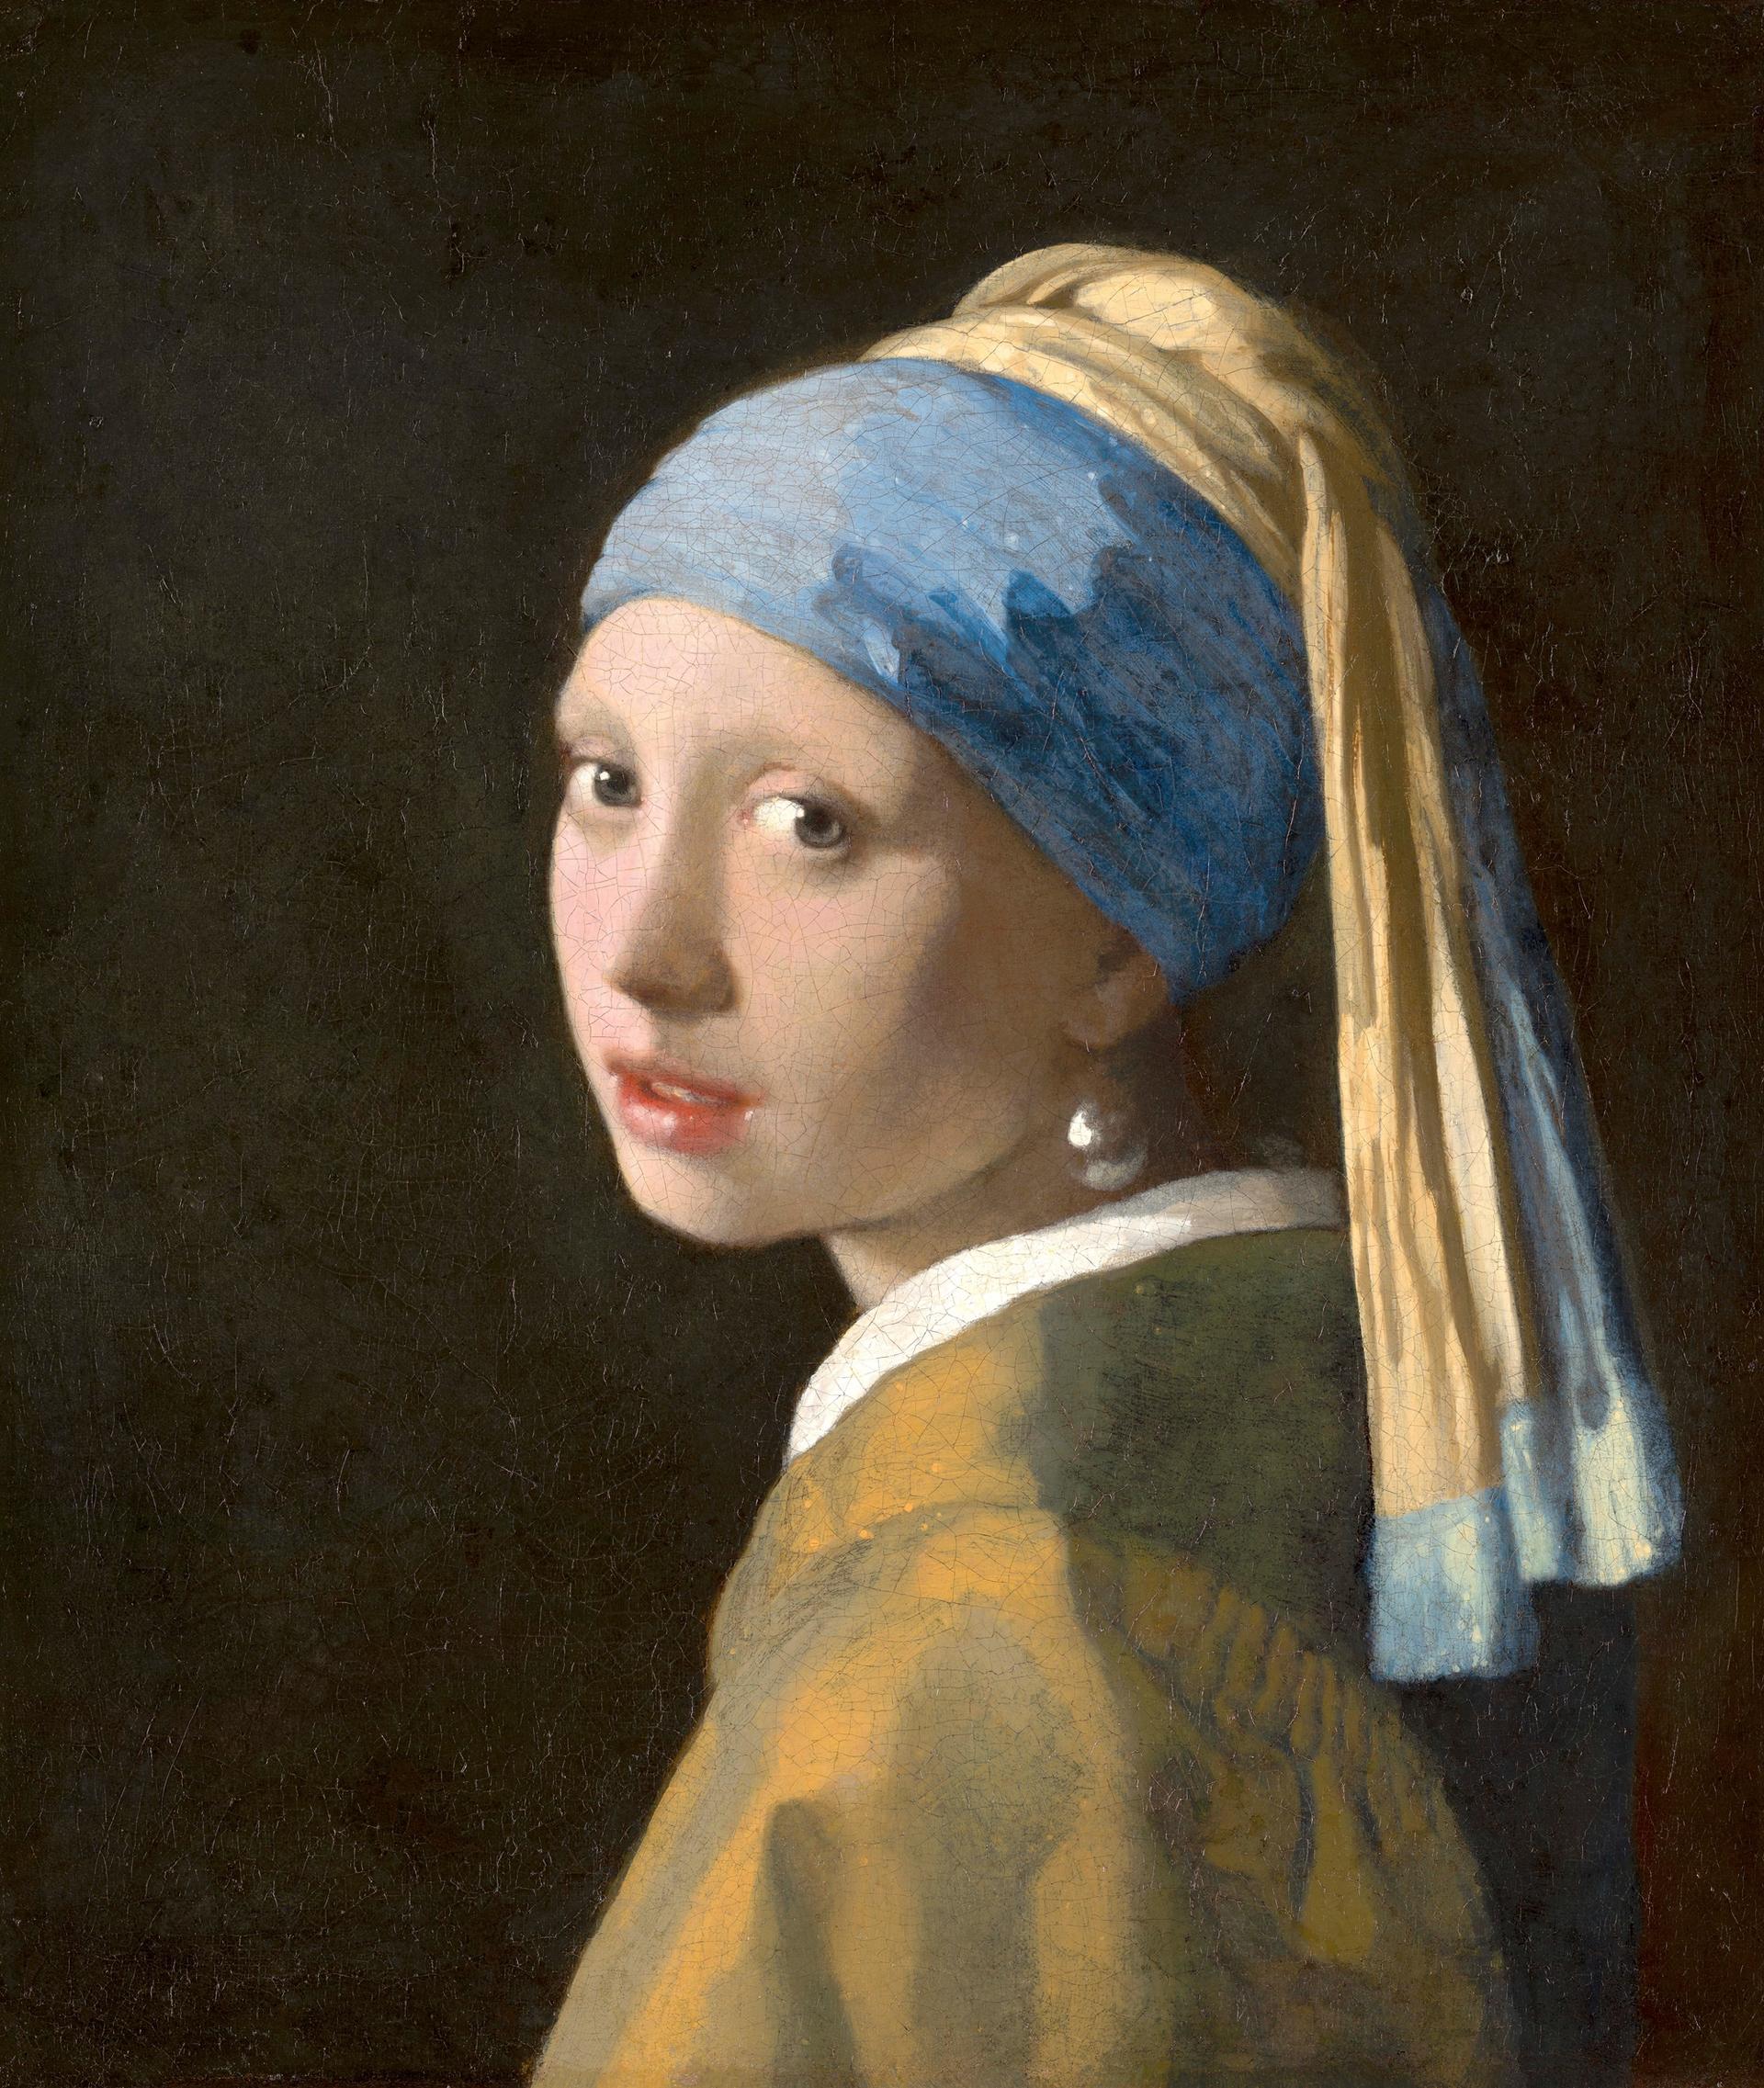 Johannes Vermeer, The Girl with a Pearl Earring (1665) from the Mauritshuis © Mauritshuis, Den Haag